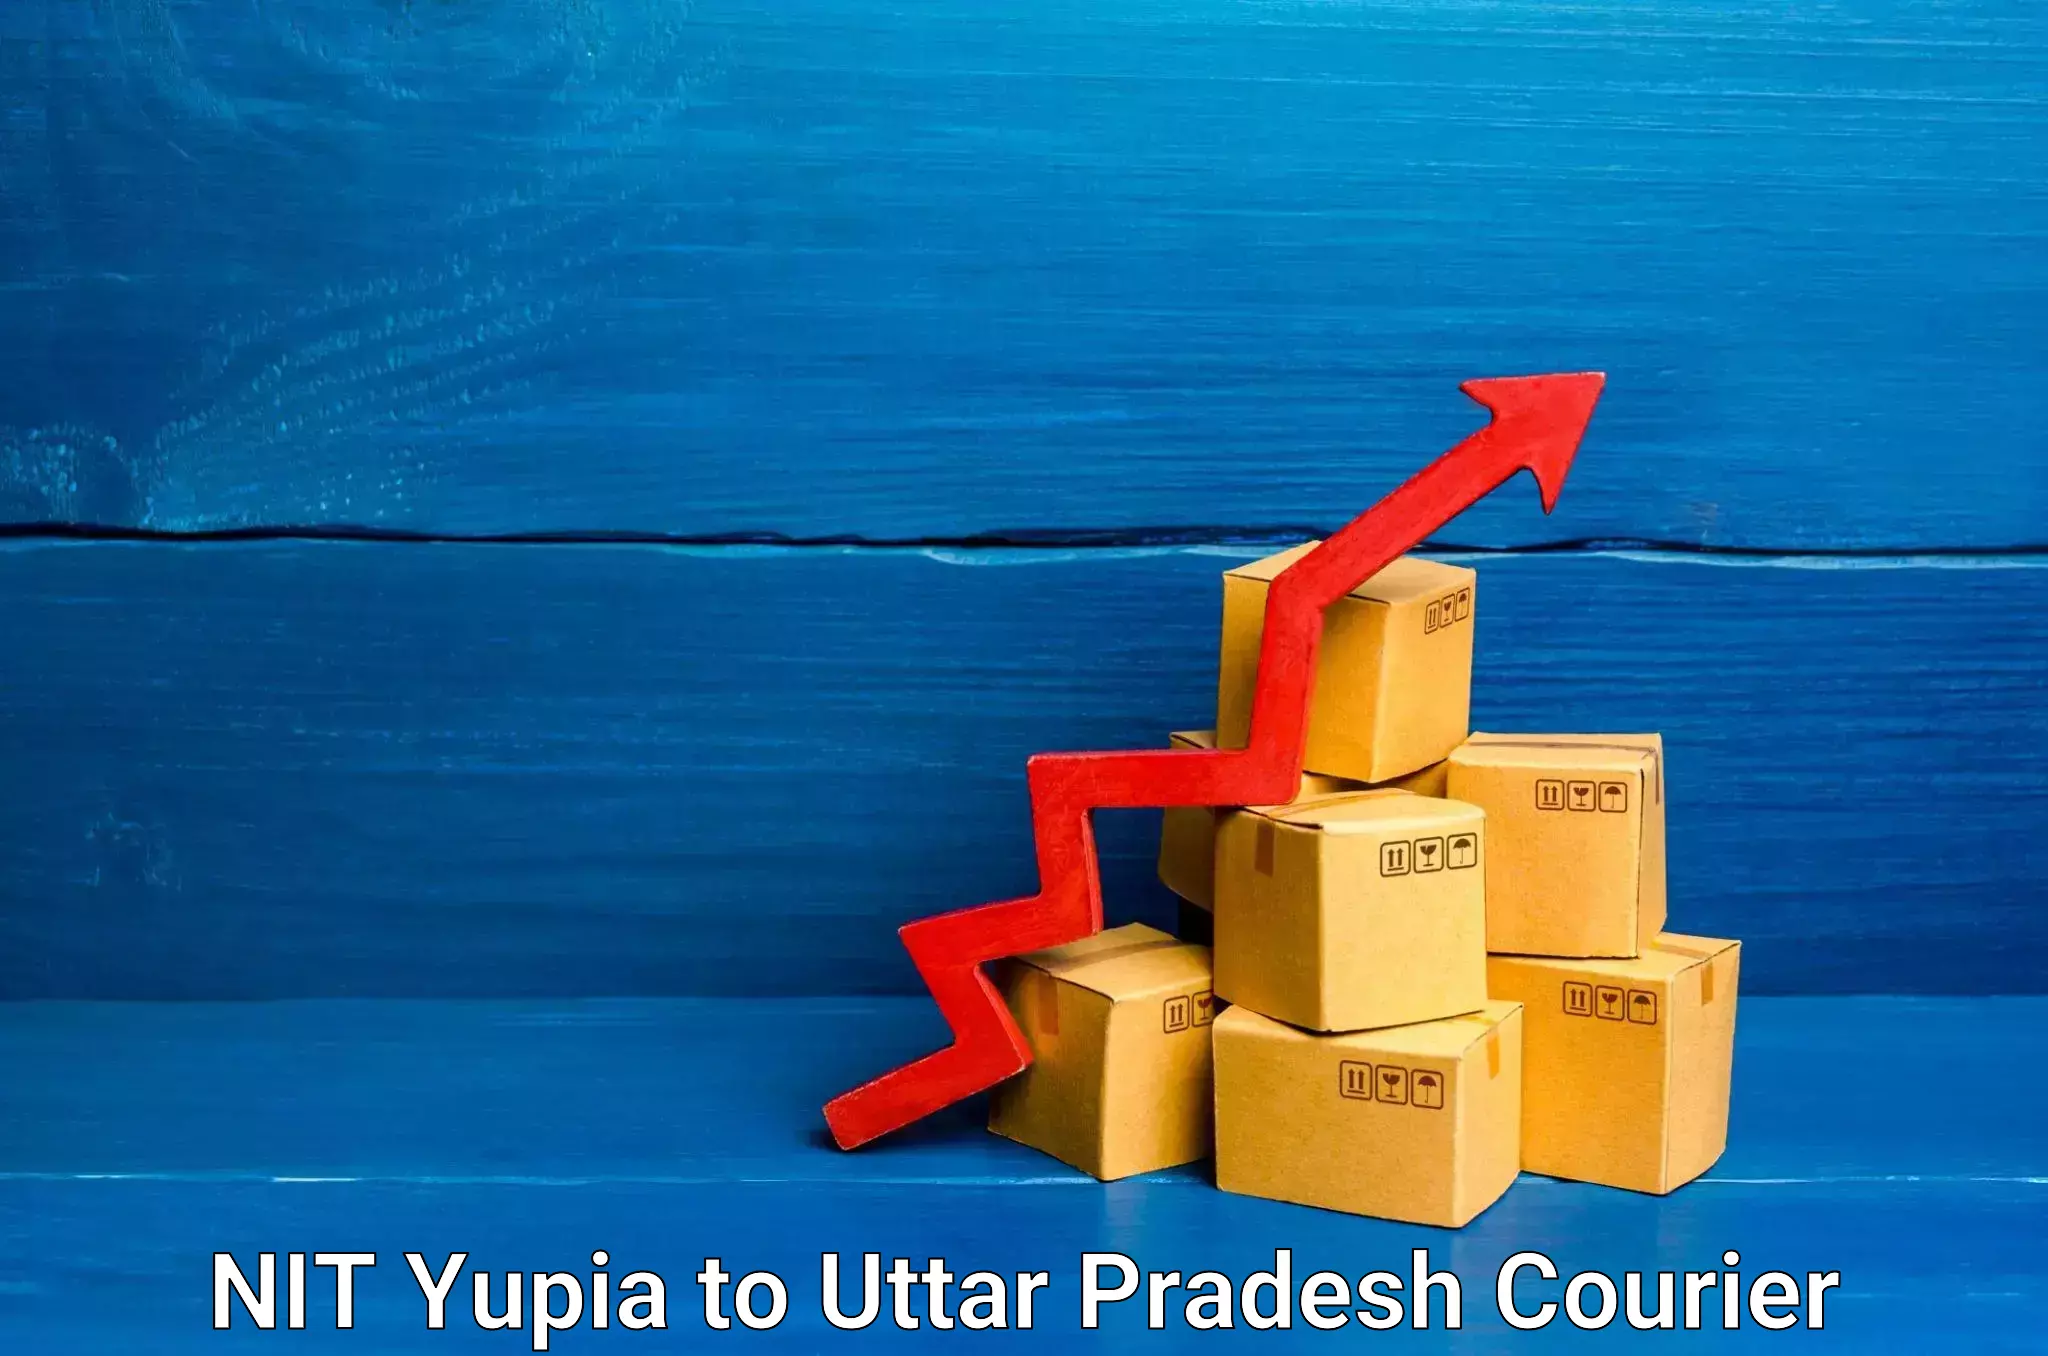 Domestic courier NIT Yupia to Lucknow